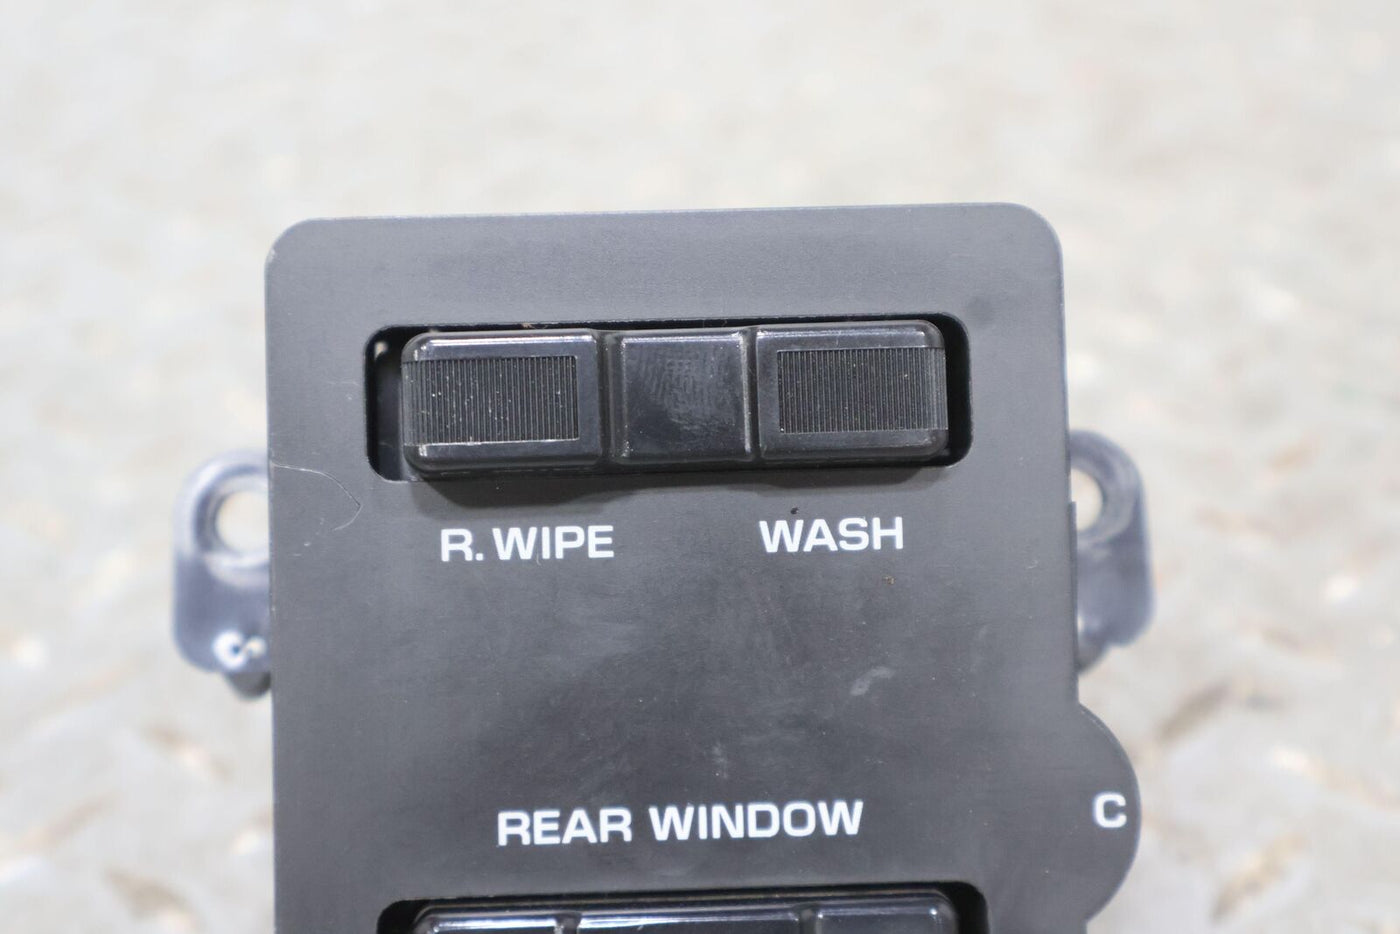 91-96 Chevy Caprice Wagon Rear Wiper Control Switch (Tested) See Notes